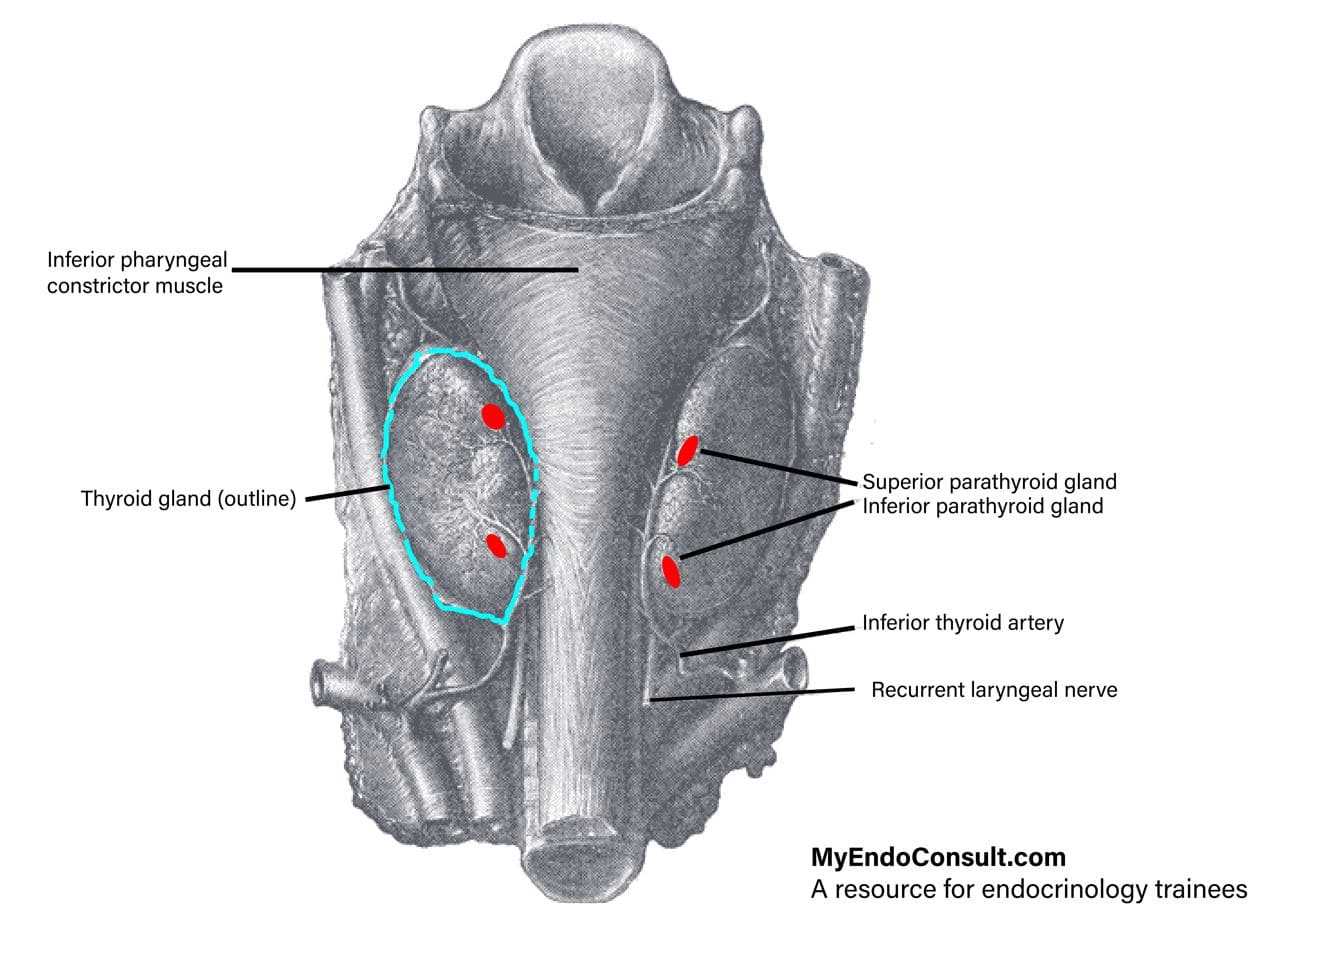 anatomic location of the parathyroid glands